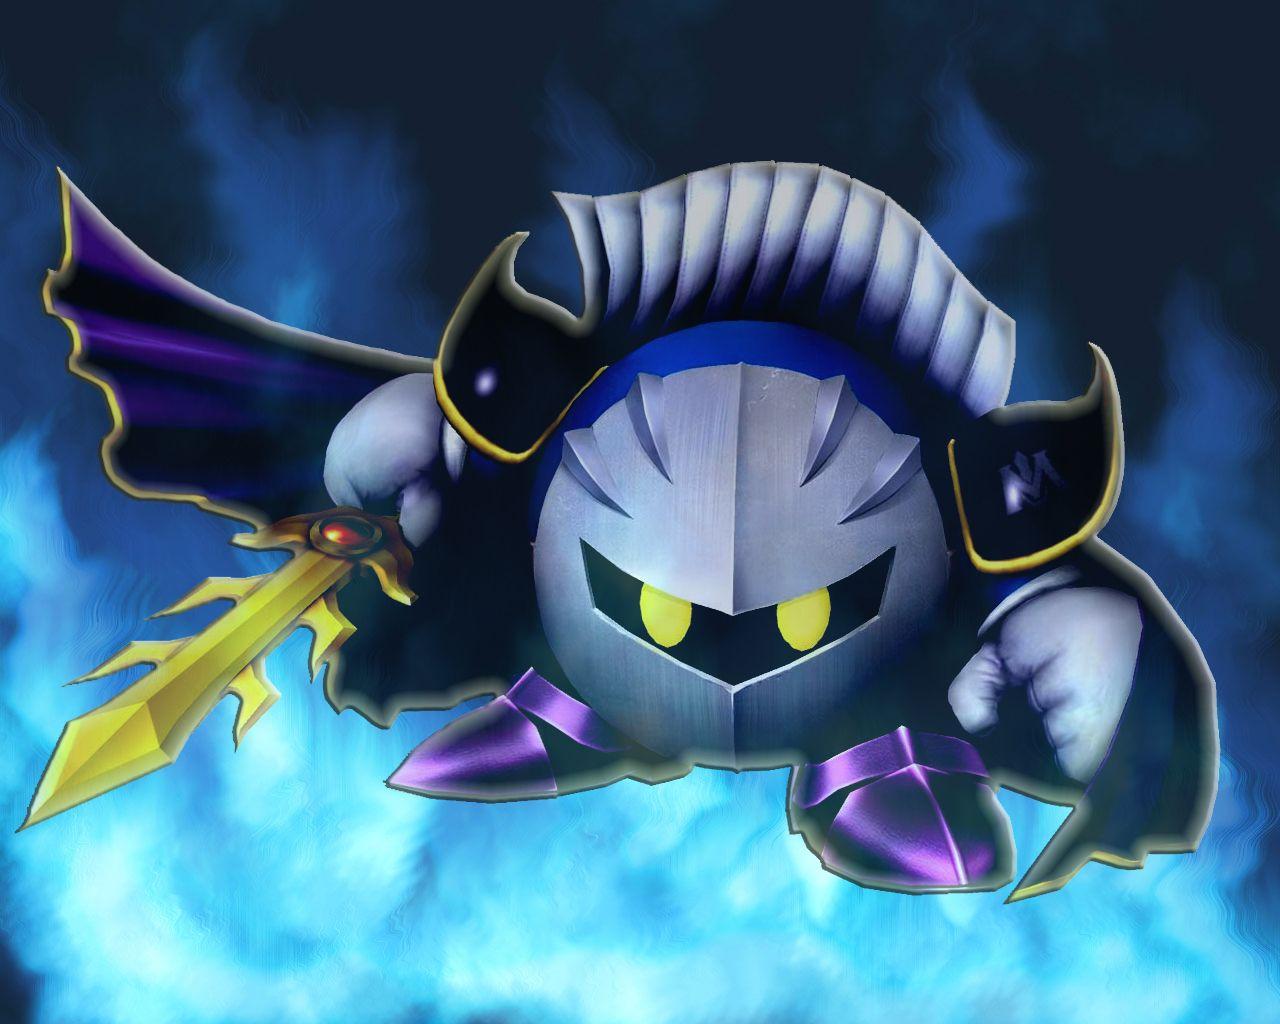 Is Meta Knight Wallpaper The Most Trending Thing Now?. meta knight